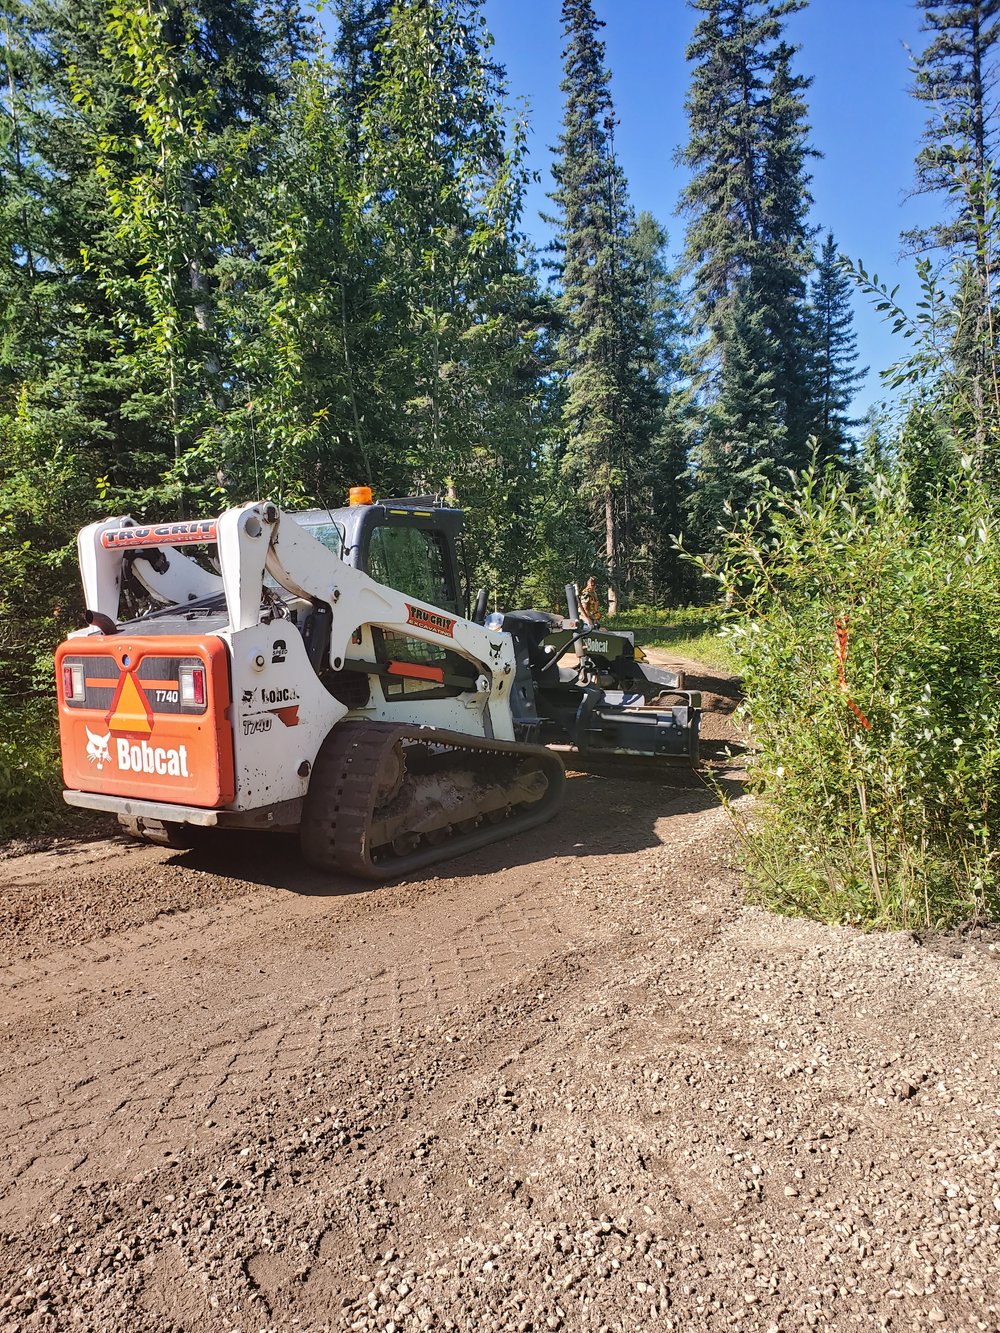 Laying of gravel on next part of trail